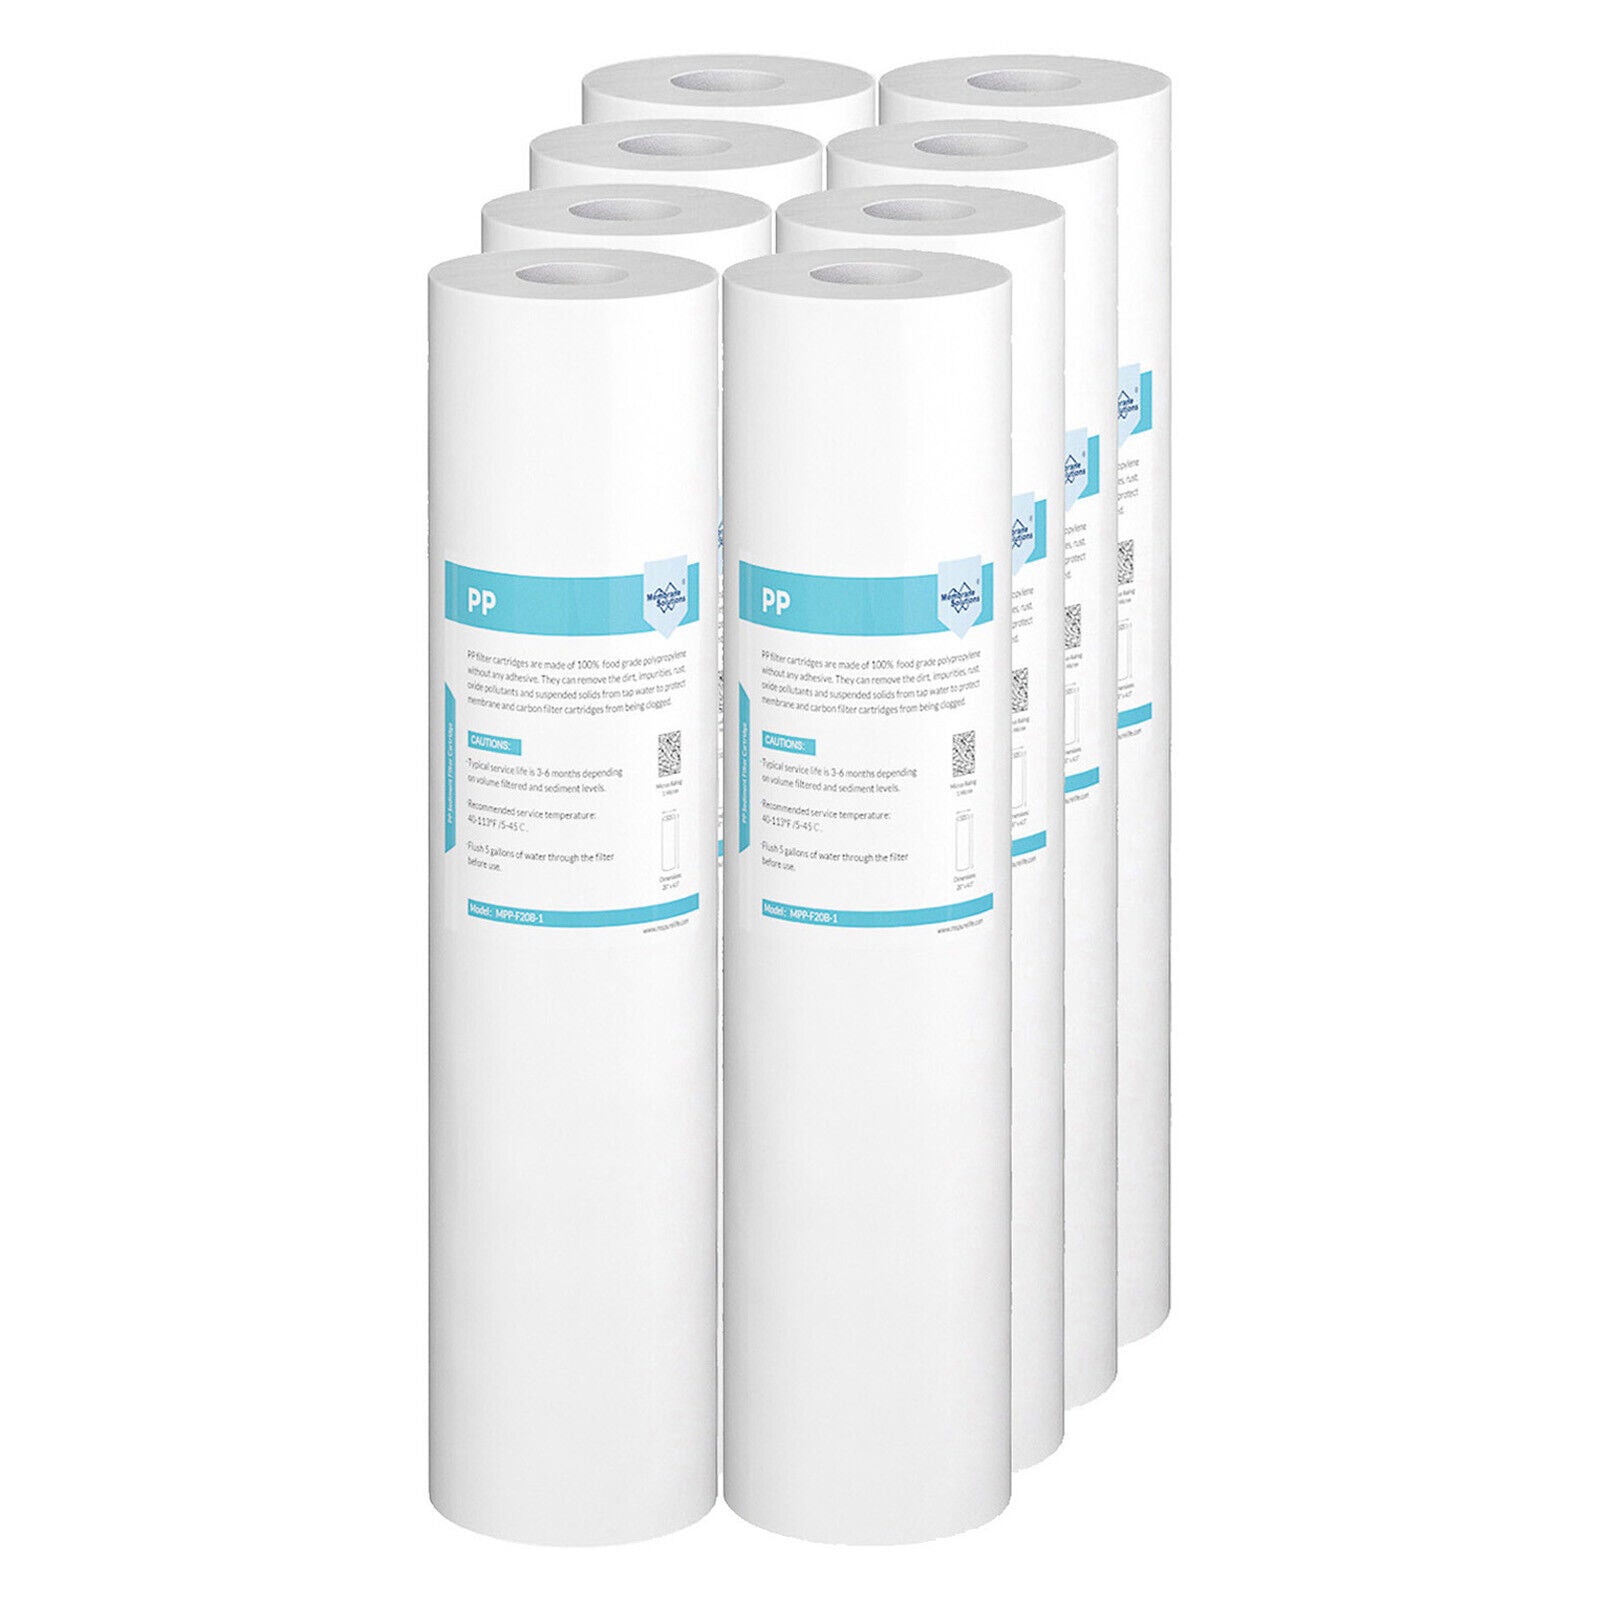 Membrane Solutions 20 Inch 20" x 4.5" Whole House PP Sediment Water Filter Cartridge Replacement